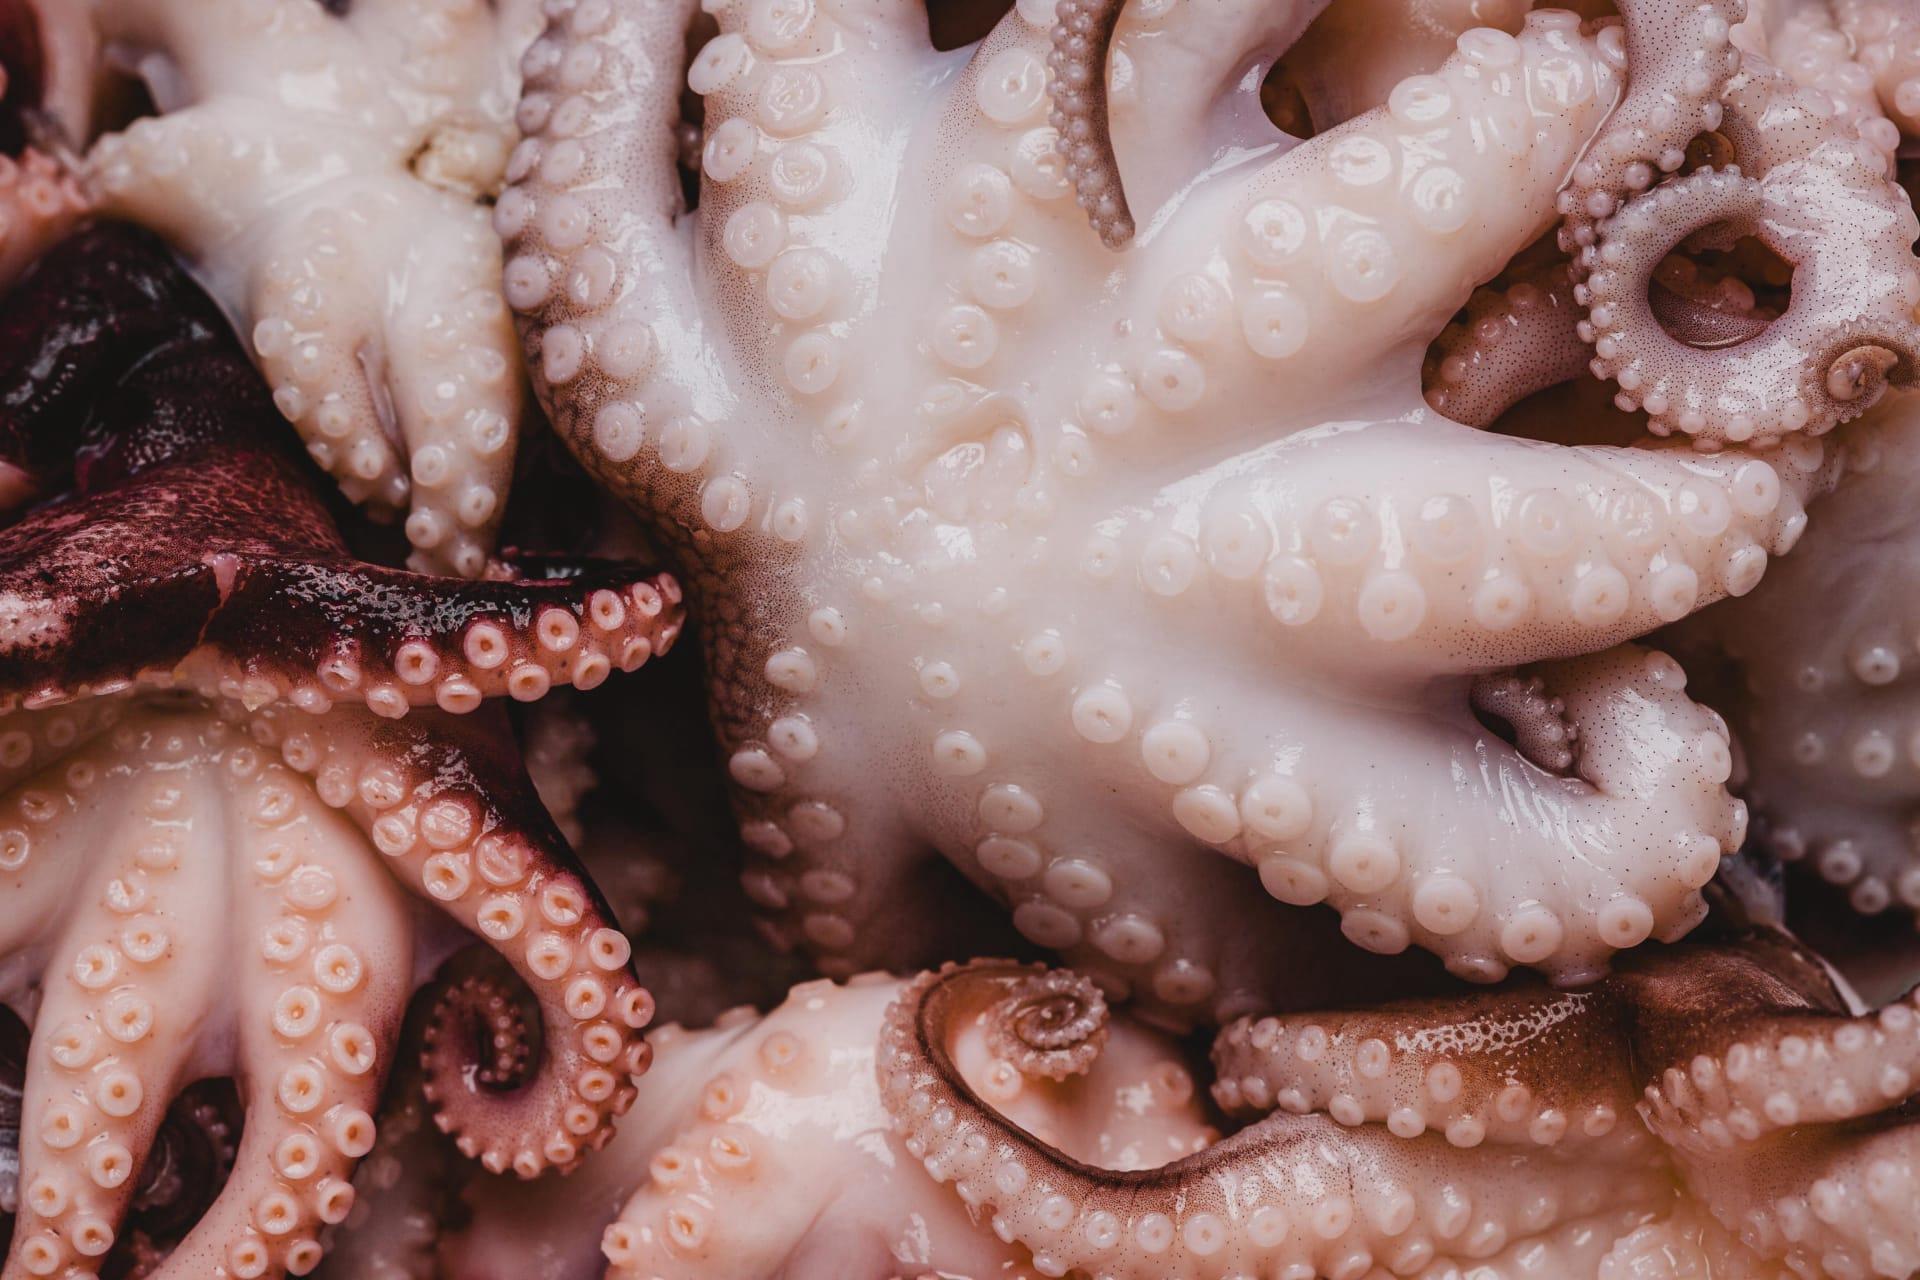 Octopus pictures